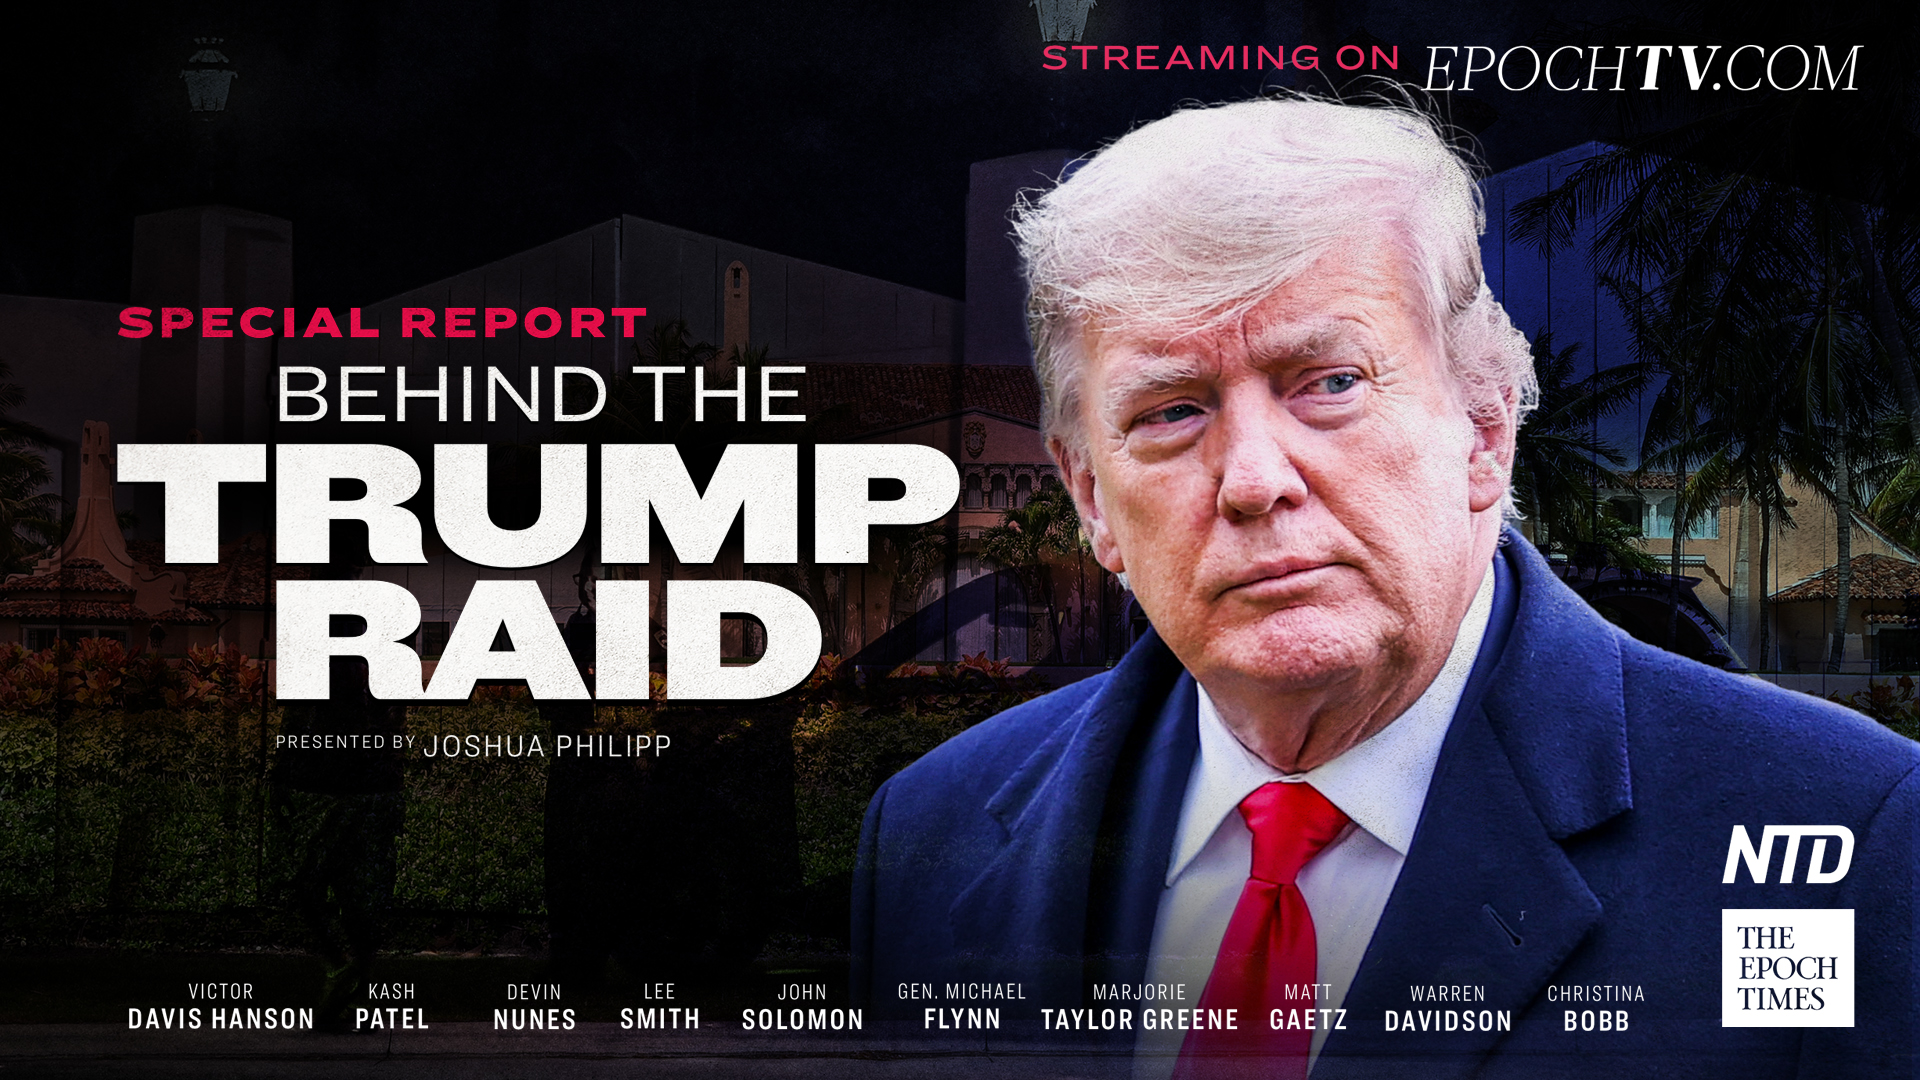 Ready go to ... https://ept.ms/TrumpSpecial0812YT [ Special Report: Behind the Trump Raid | FBI | Trump | Epochtv]